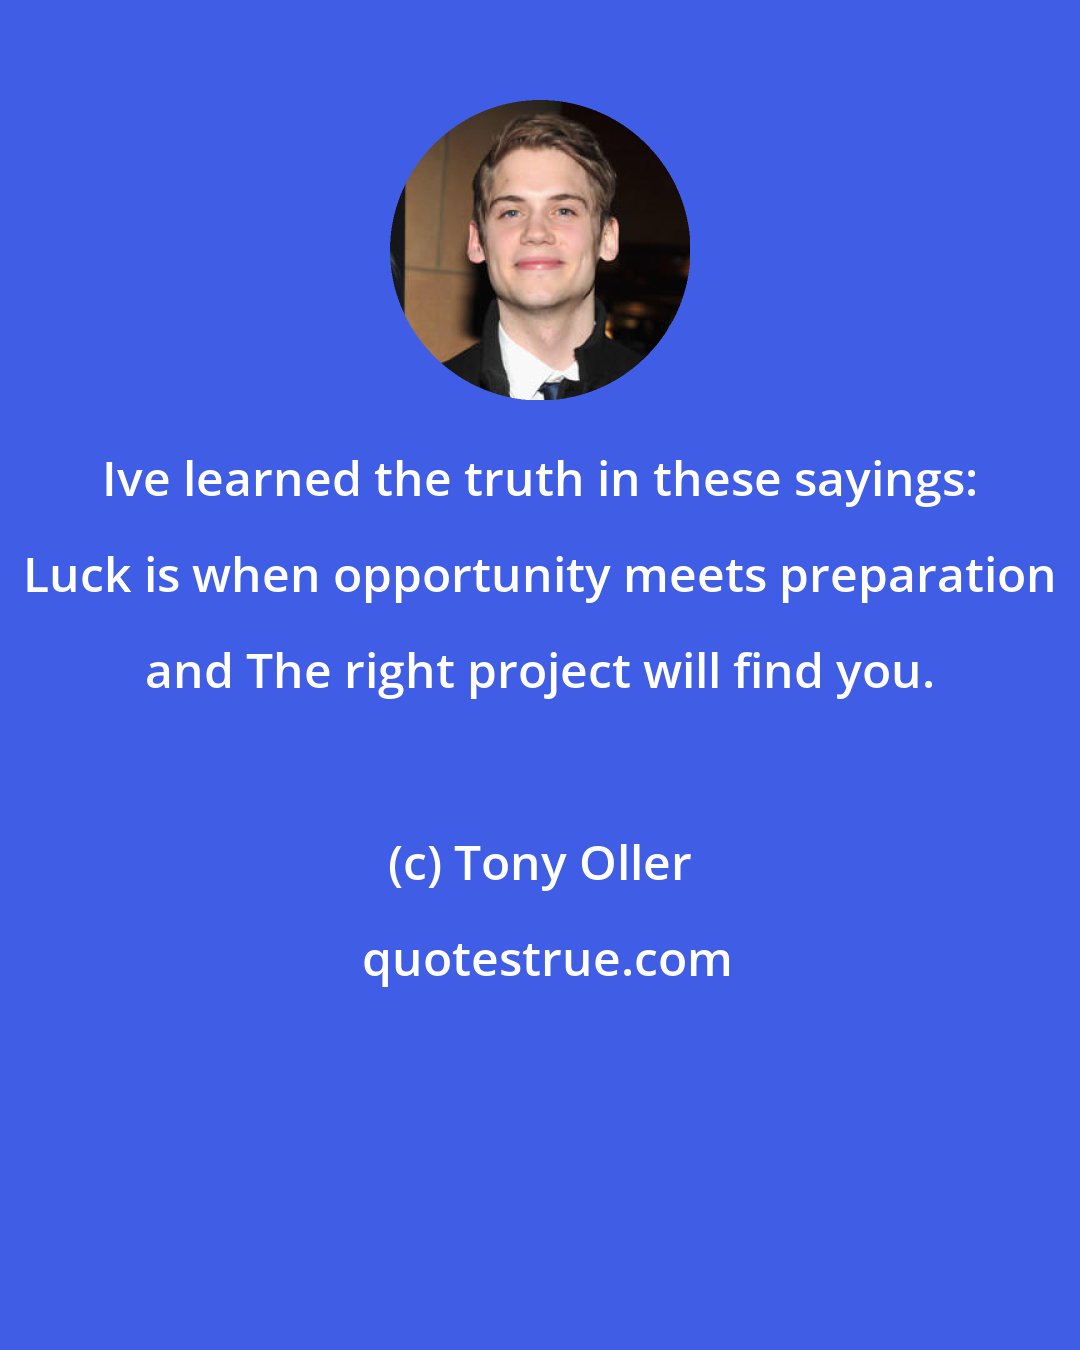 Tony Oller: Ive learned the truth in these sayings: Luck is when opportunity meets preparation and The right project will find you.